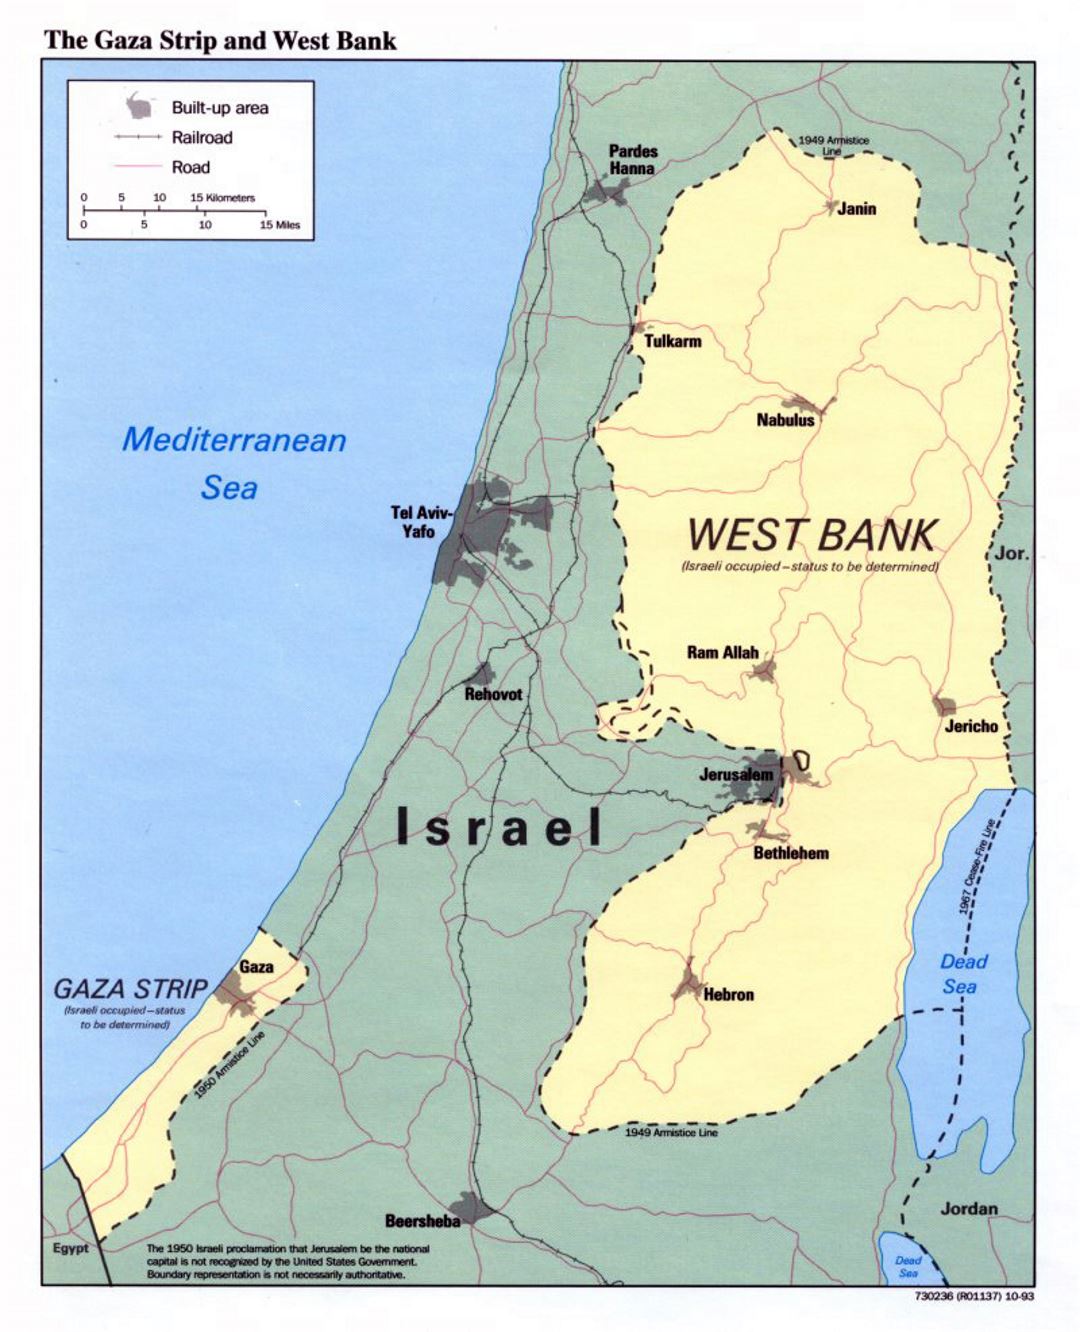 Detailed political map of the Gaza Strip and West Bank - 1993